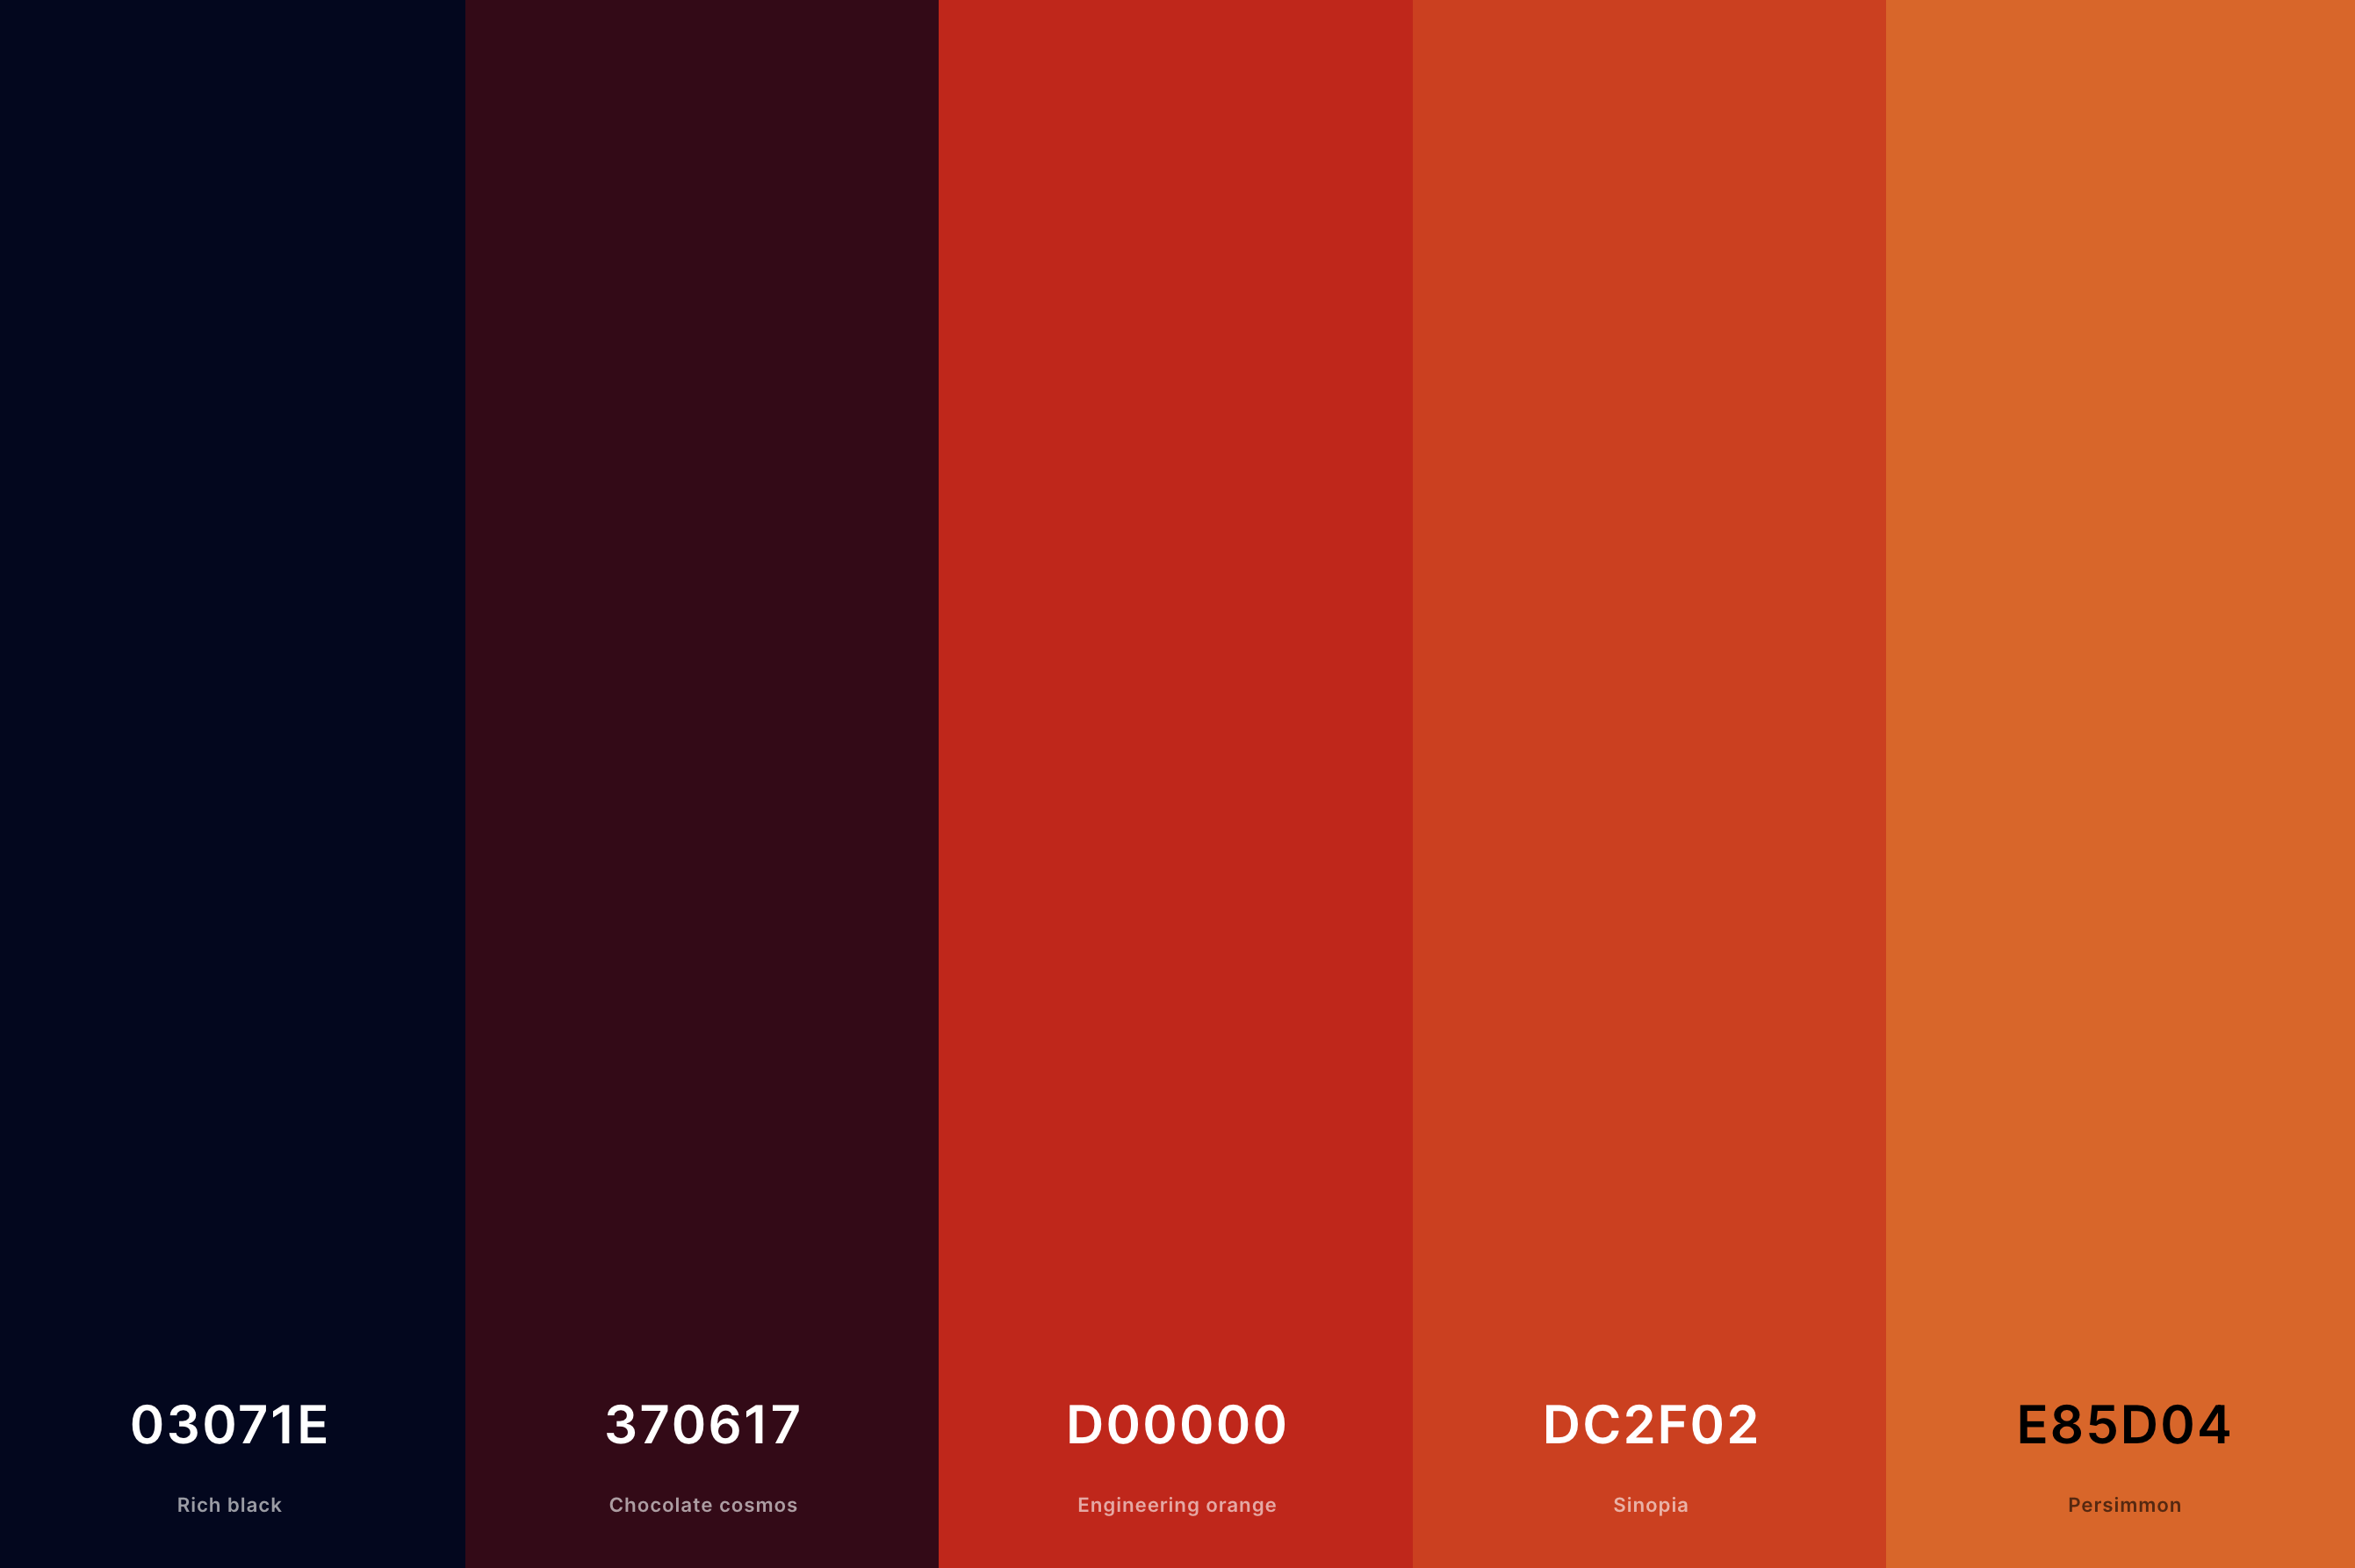 10. Orange And Black Color Palette Color Palette with Rich Black (Hex #03071E) + Chocolate Cosmos (Hex #370617) + Engineering Orange (Hex #D00000) + Sinopia (Hex #DC2F02) + Persimmon (Hex #E85D04) Color Palette with Hex Codes